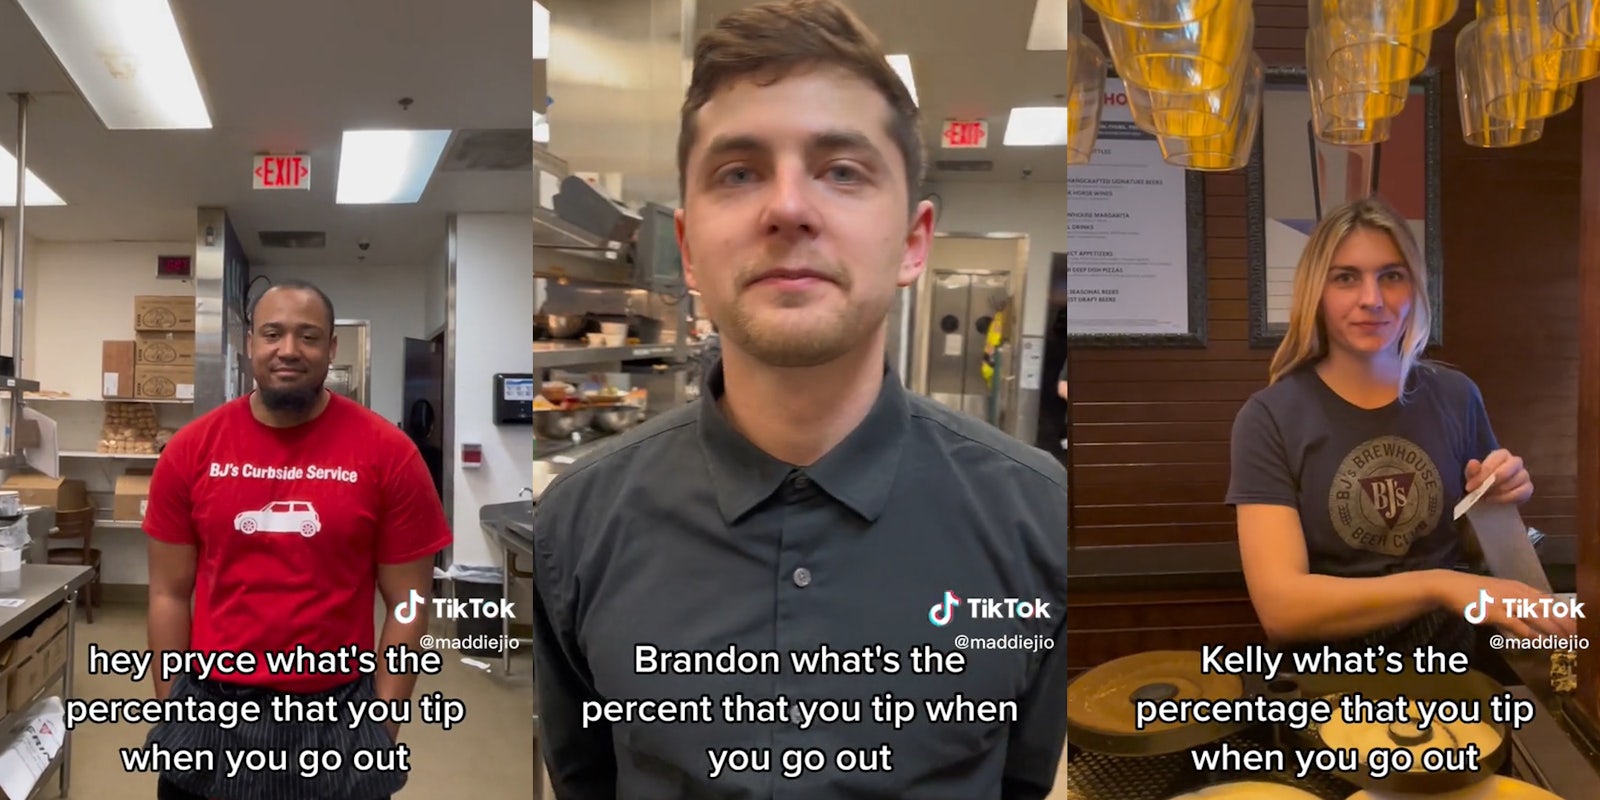 servers talk about what percent they tip out when they dine